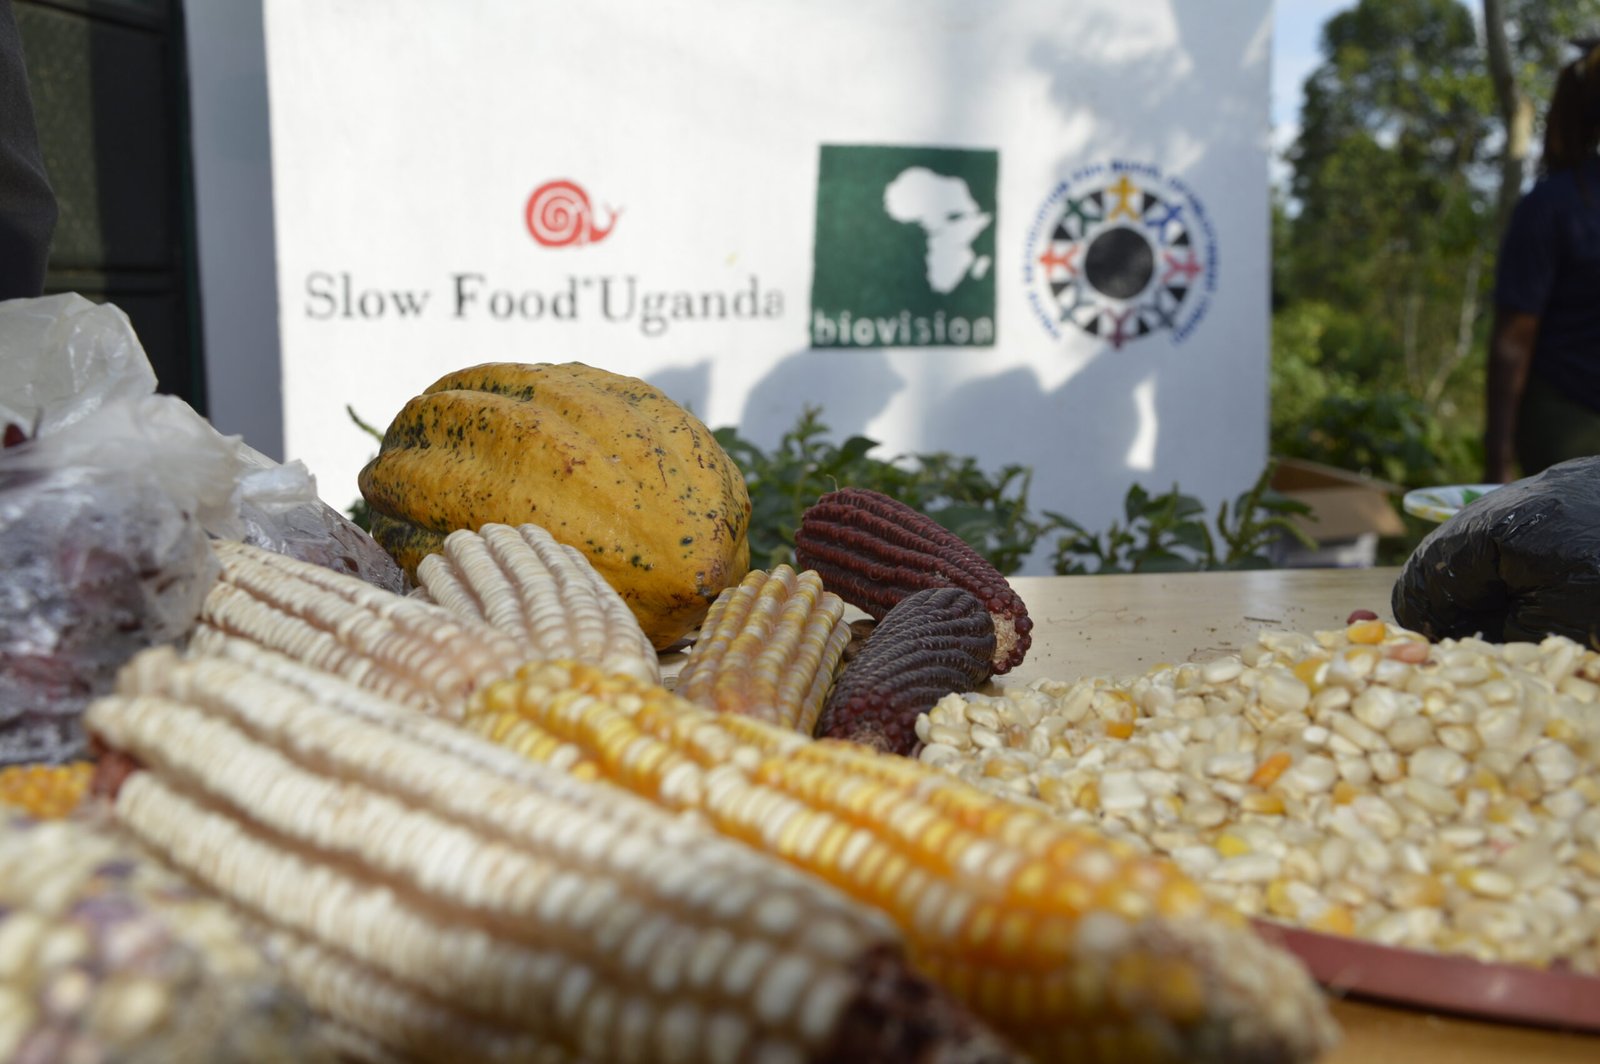 Slow Food Uganda launches Two Community Indigenous Seed Banks in Buikwe district.